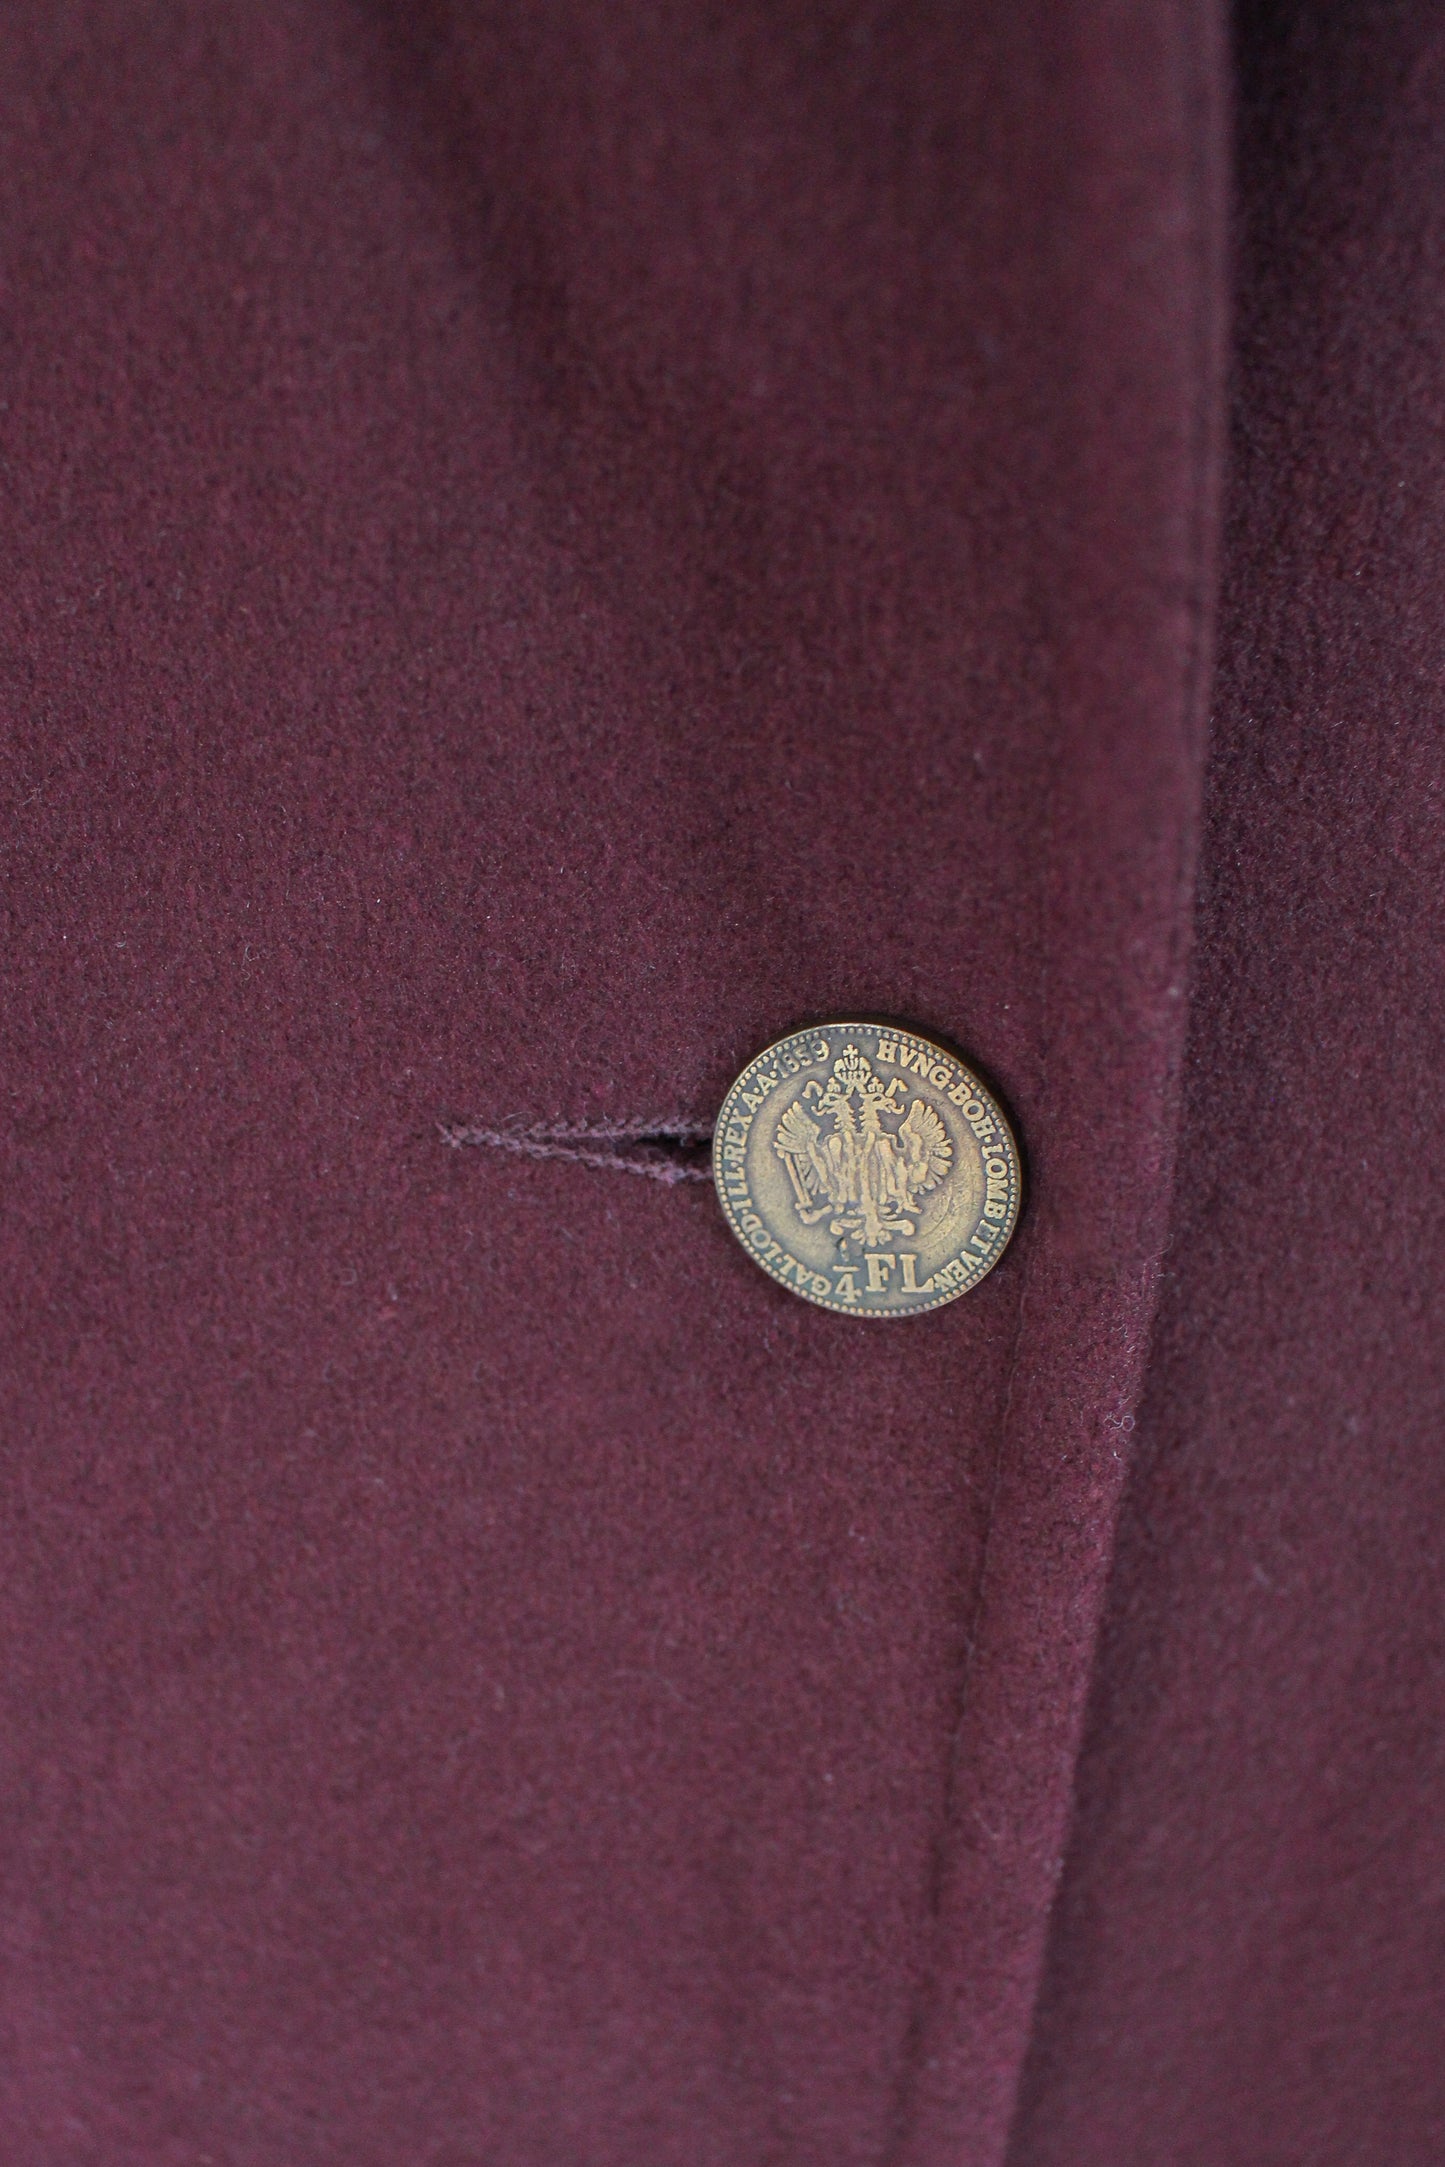 coin button on winter coat